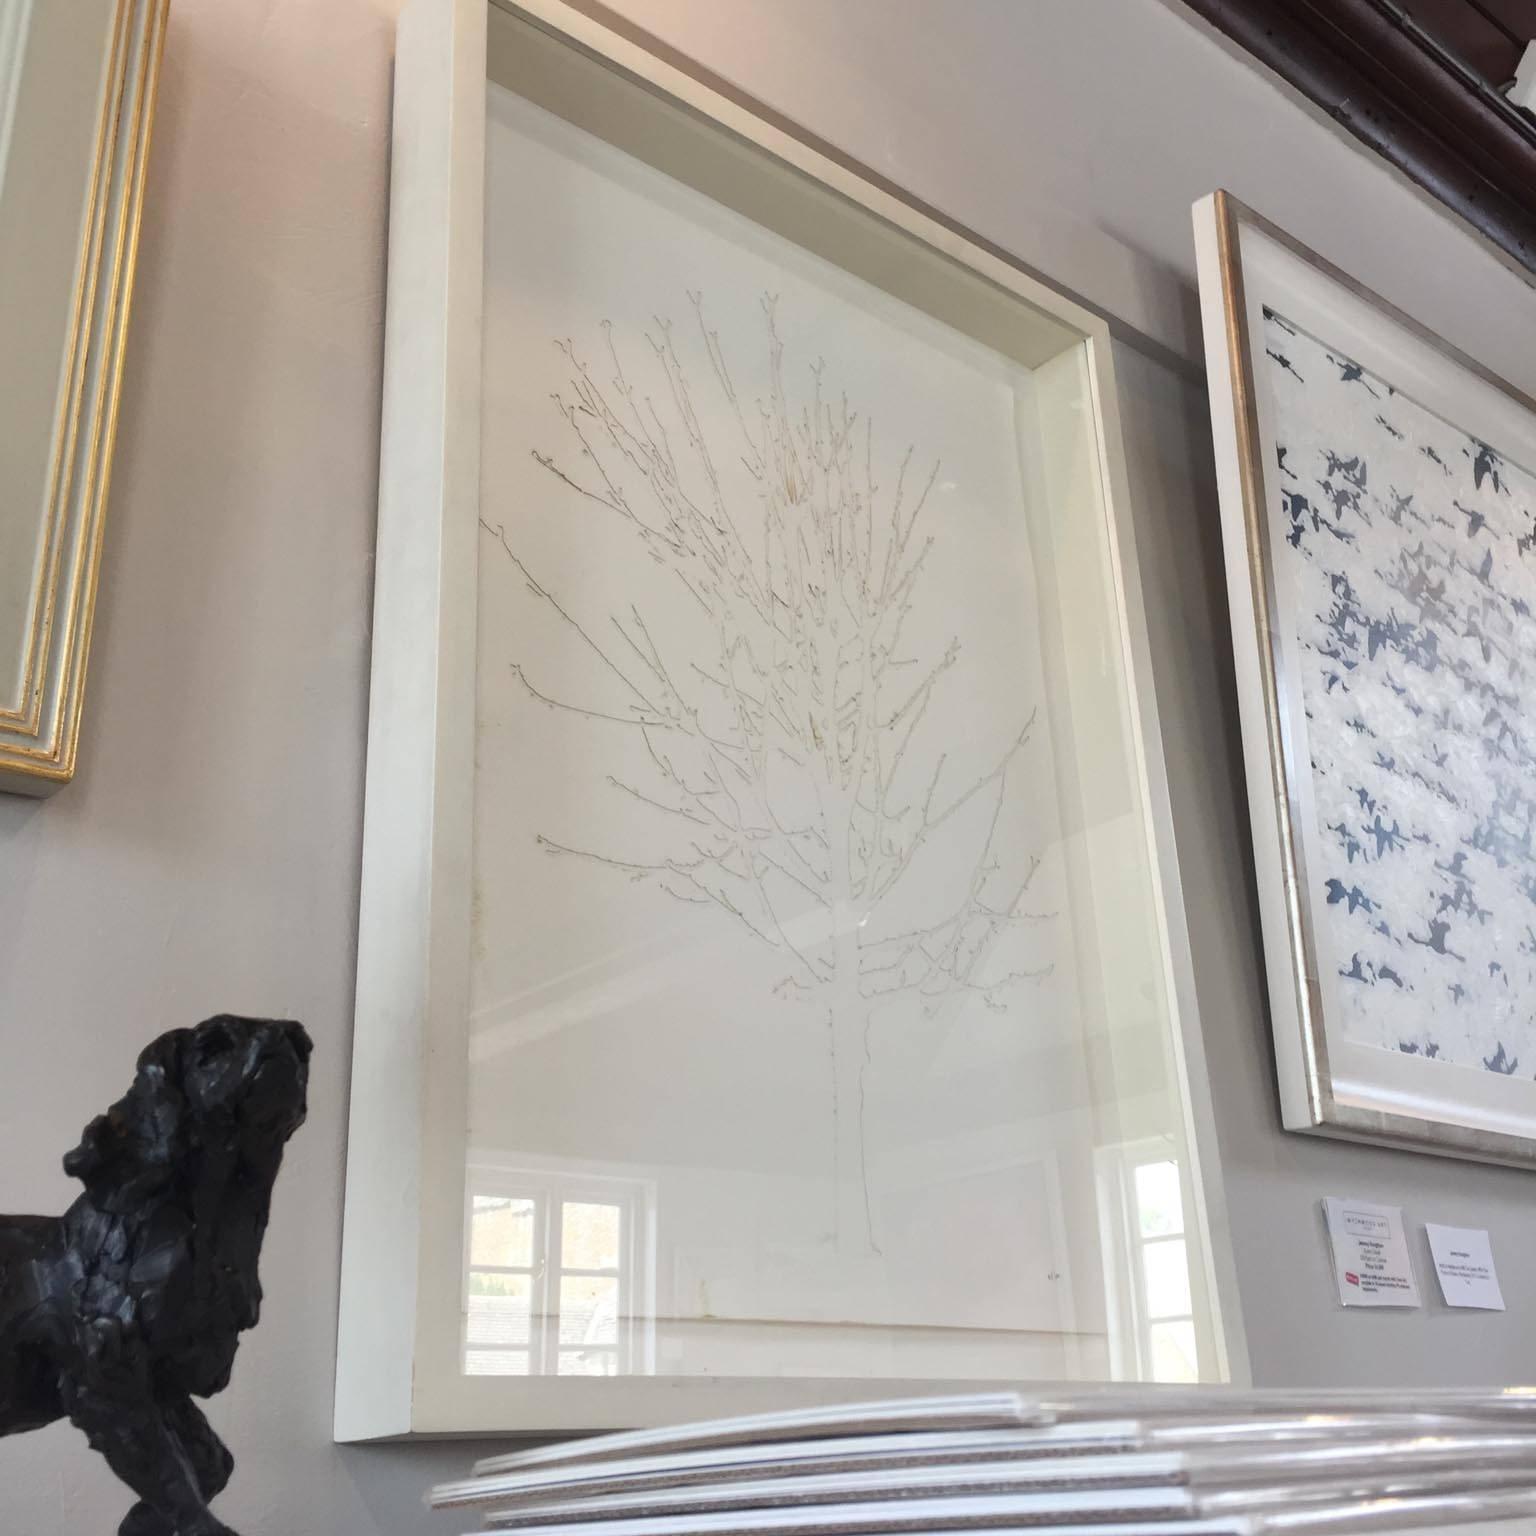 'White Tree' is a simple design of a detailed tree using white paper, an off-white frame and white frame filler to create a pure piece of artwork. The tree has been produced using laser cut paper, which has been left untouched so you can see where